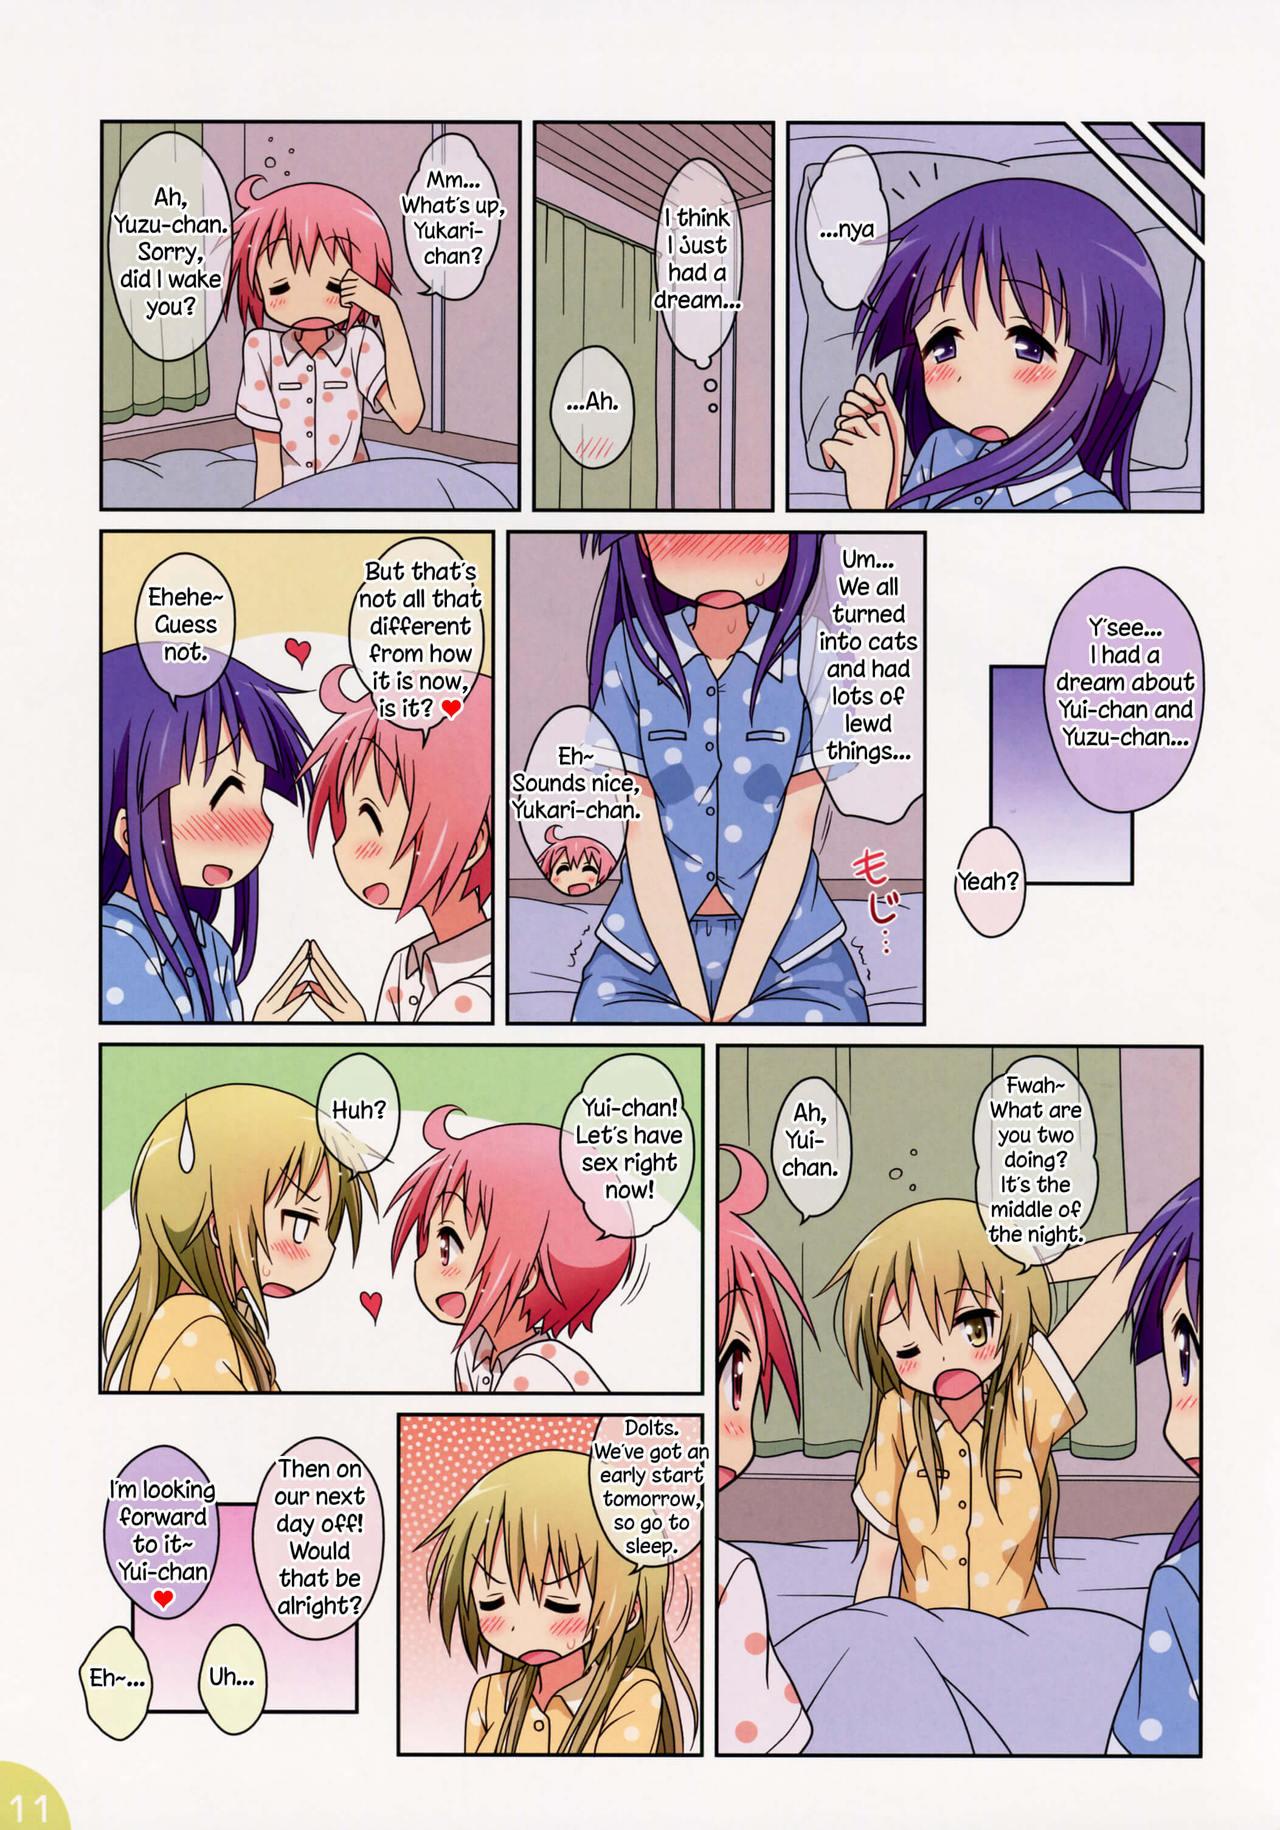 Small Happy Style! 3 - Yuyushiki Free 18 Year Old Porn - Page 11